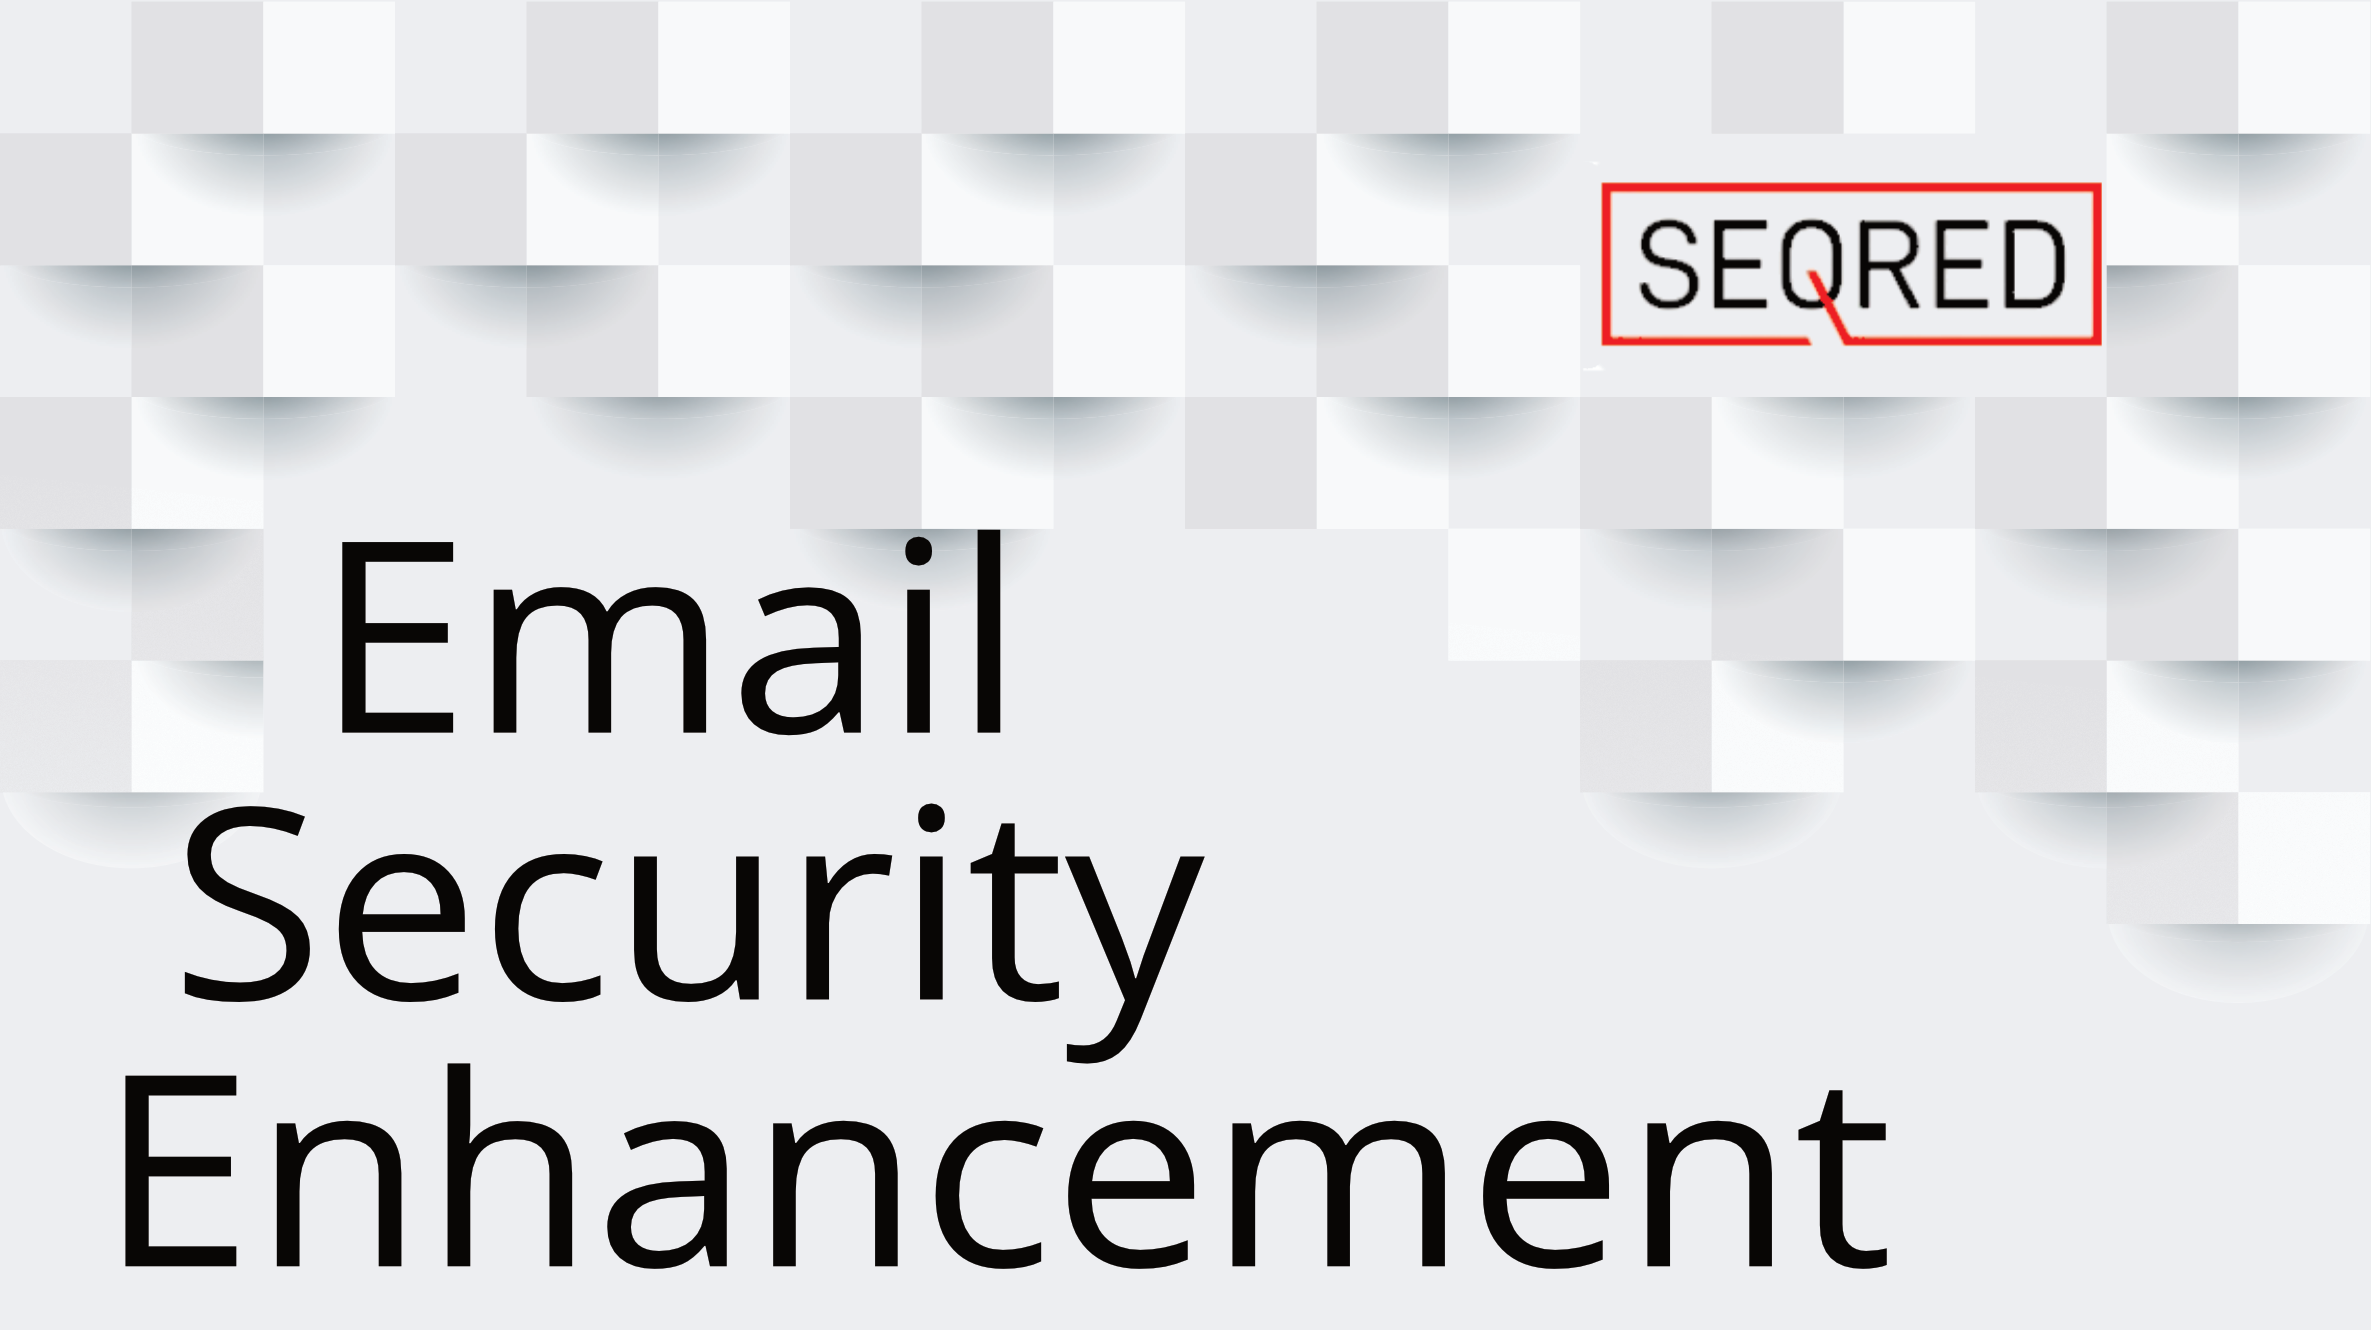 Email Security Enhancement